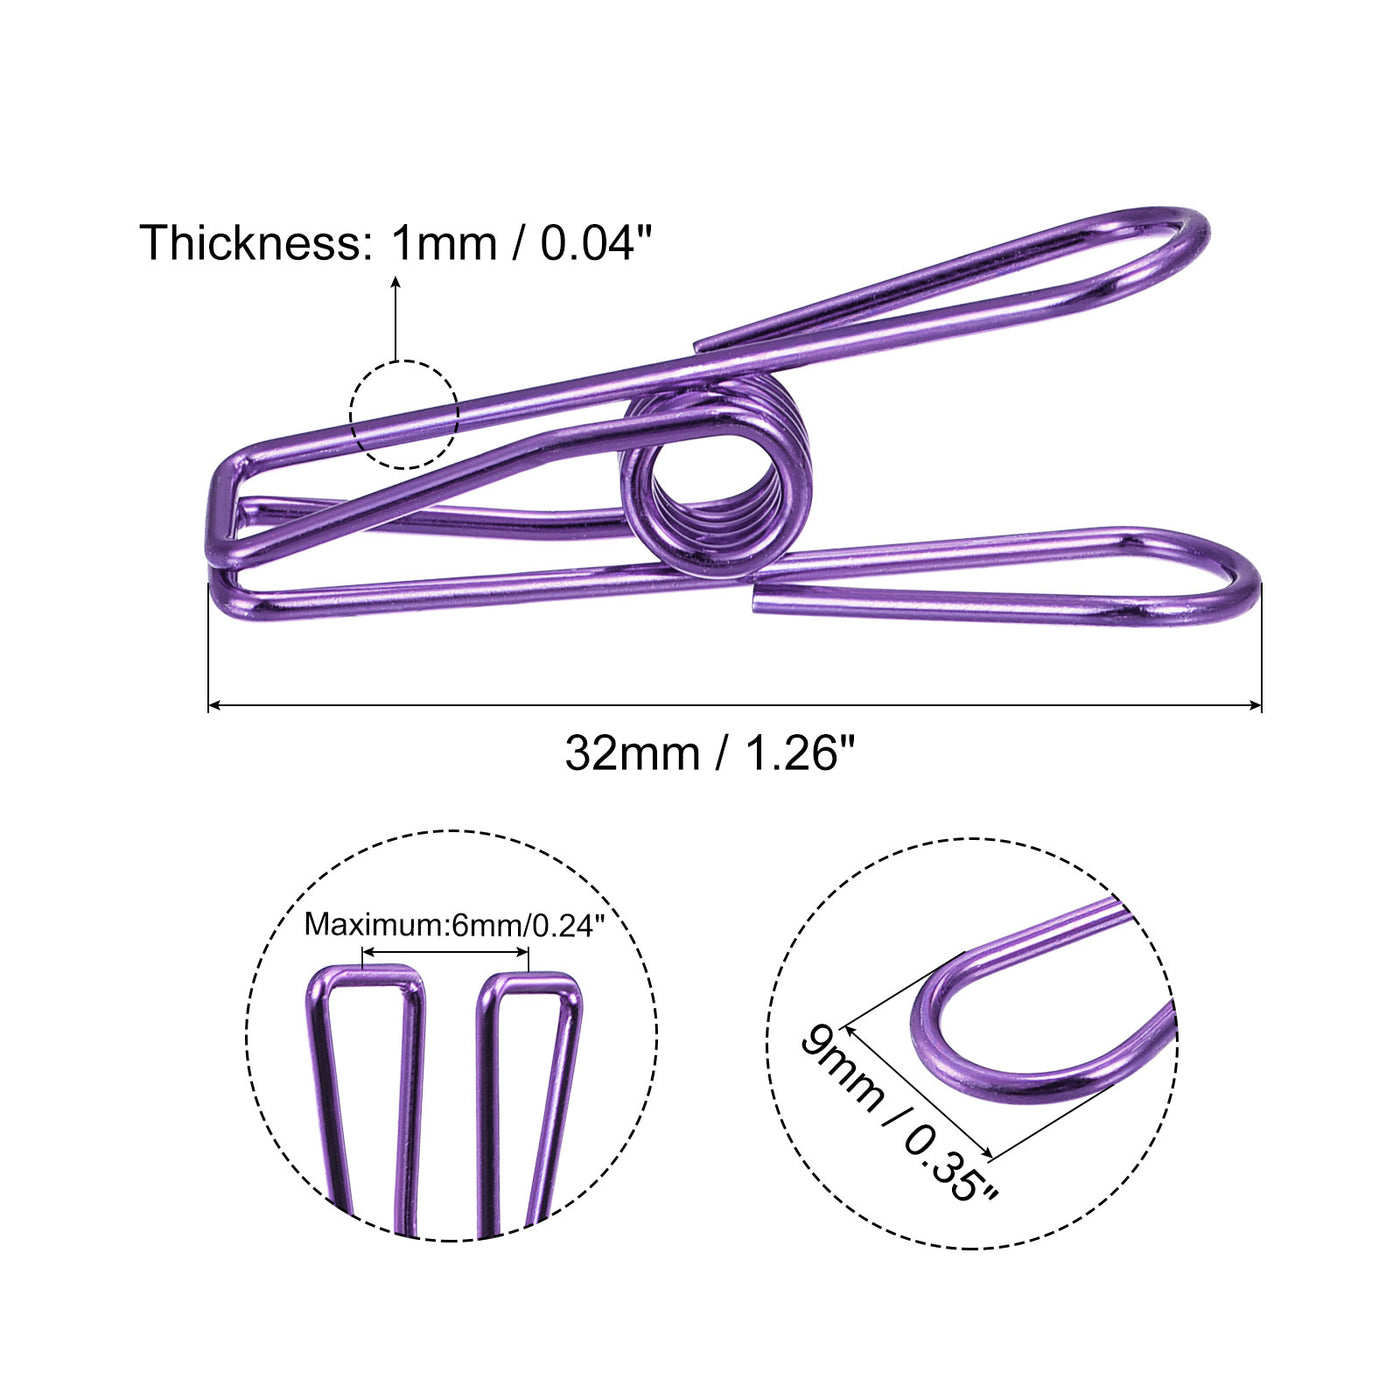 uxcell Uxcell Tablecloth Clips, 32mm Carbon Steel Clamps for Fixing Table Cloth, Purple 25 Pcs